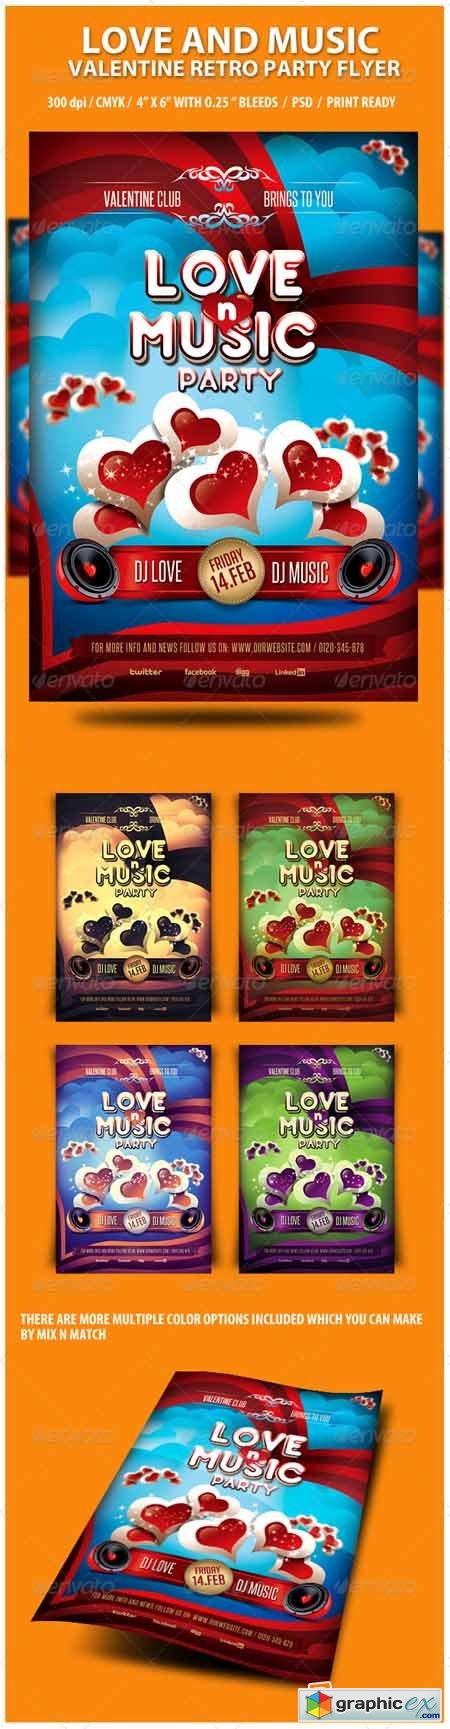 Love and Music Valentine Retro Party Flyer